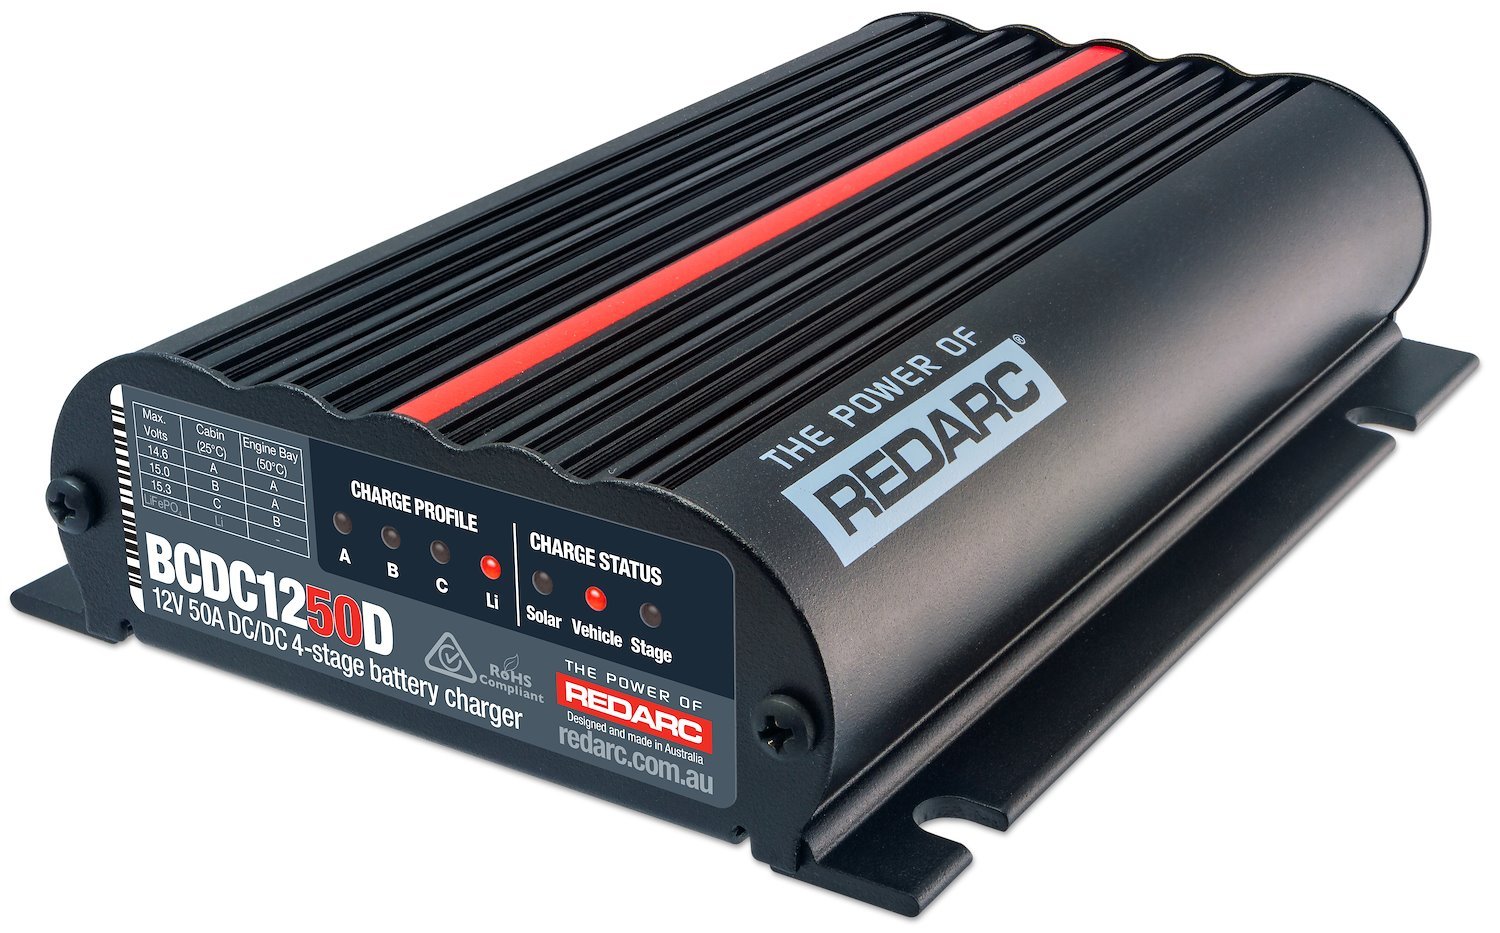 BCDC1250D 12 V In-Vehicle DC-DC Battery Charger, 50 Amp